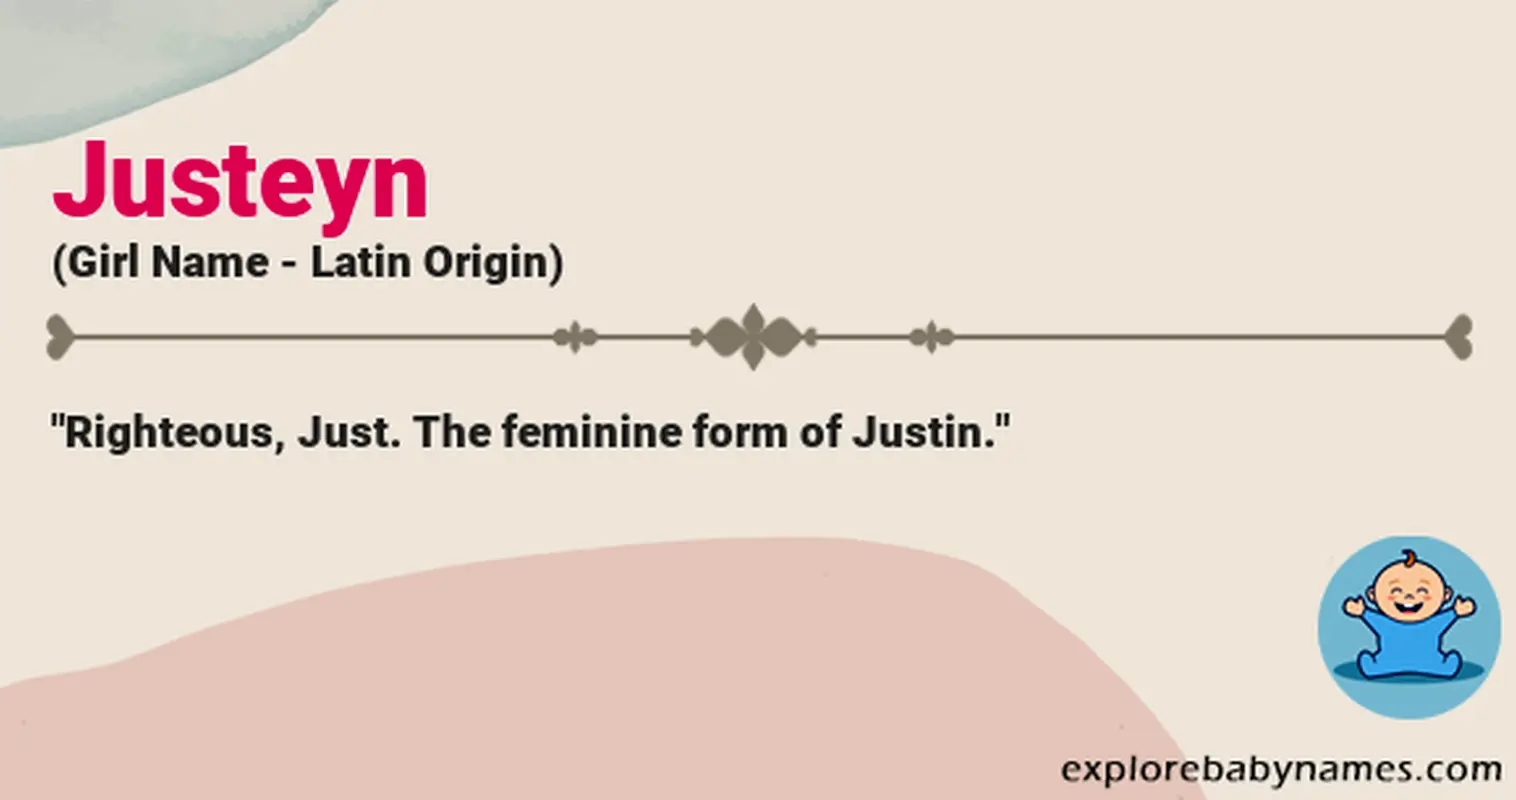 Meaning of Justeyn